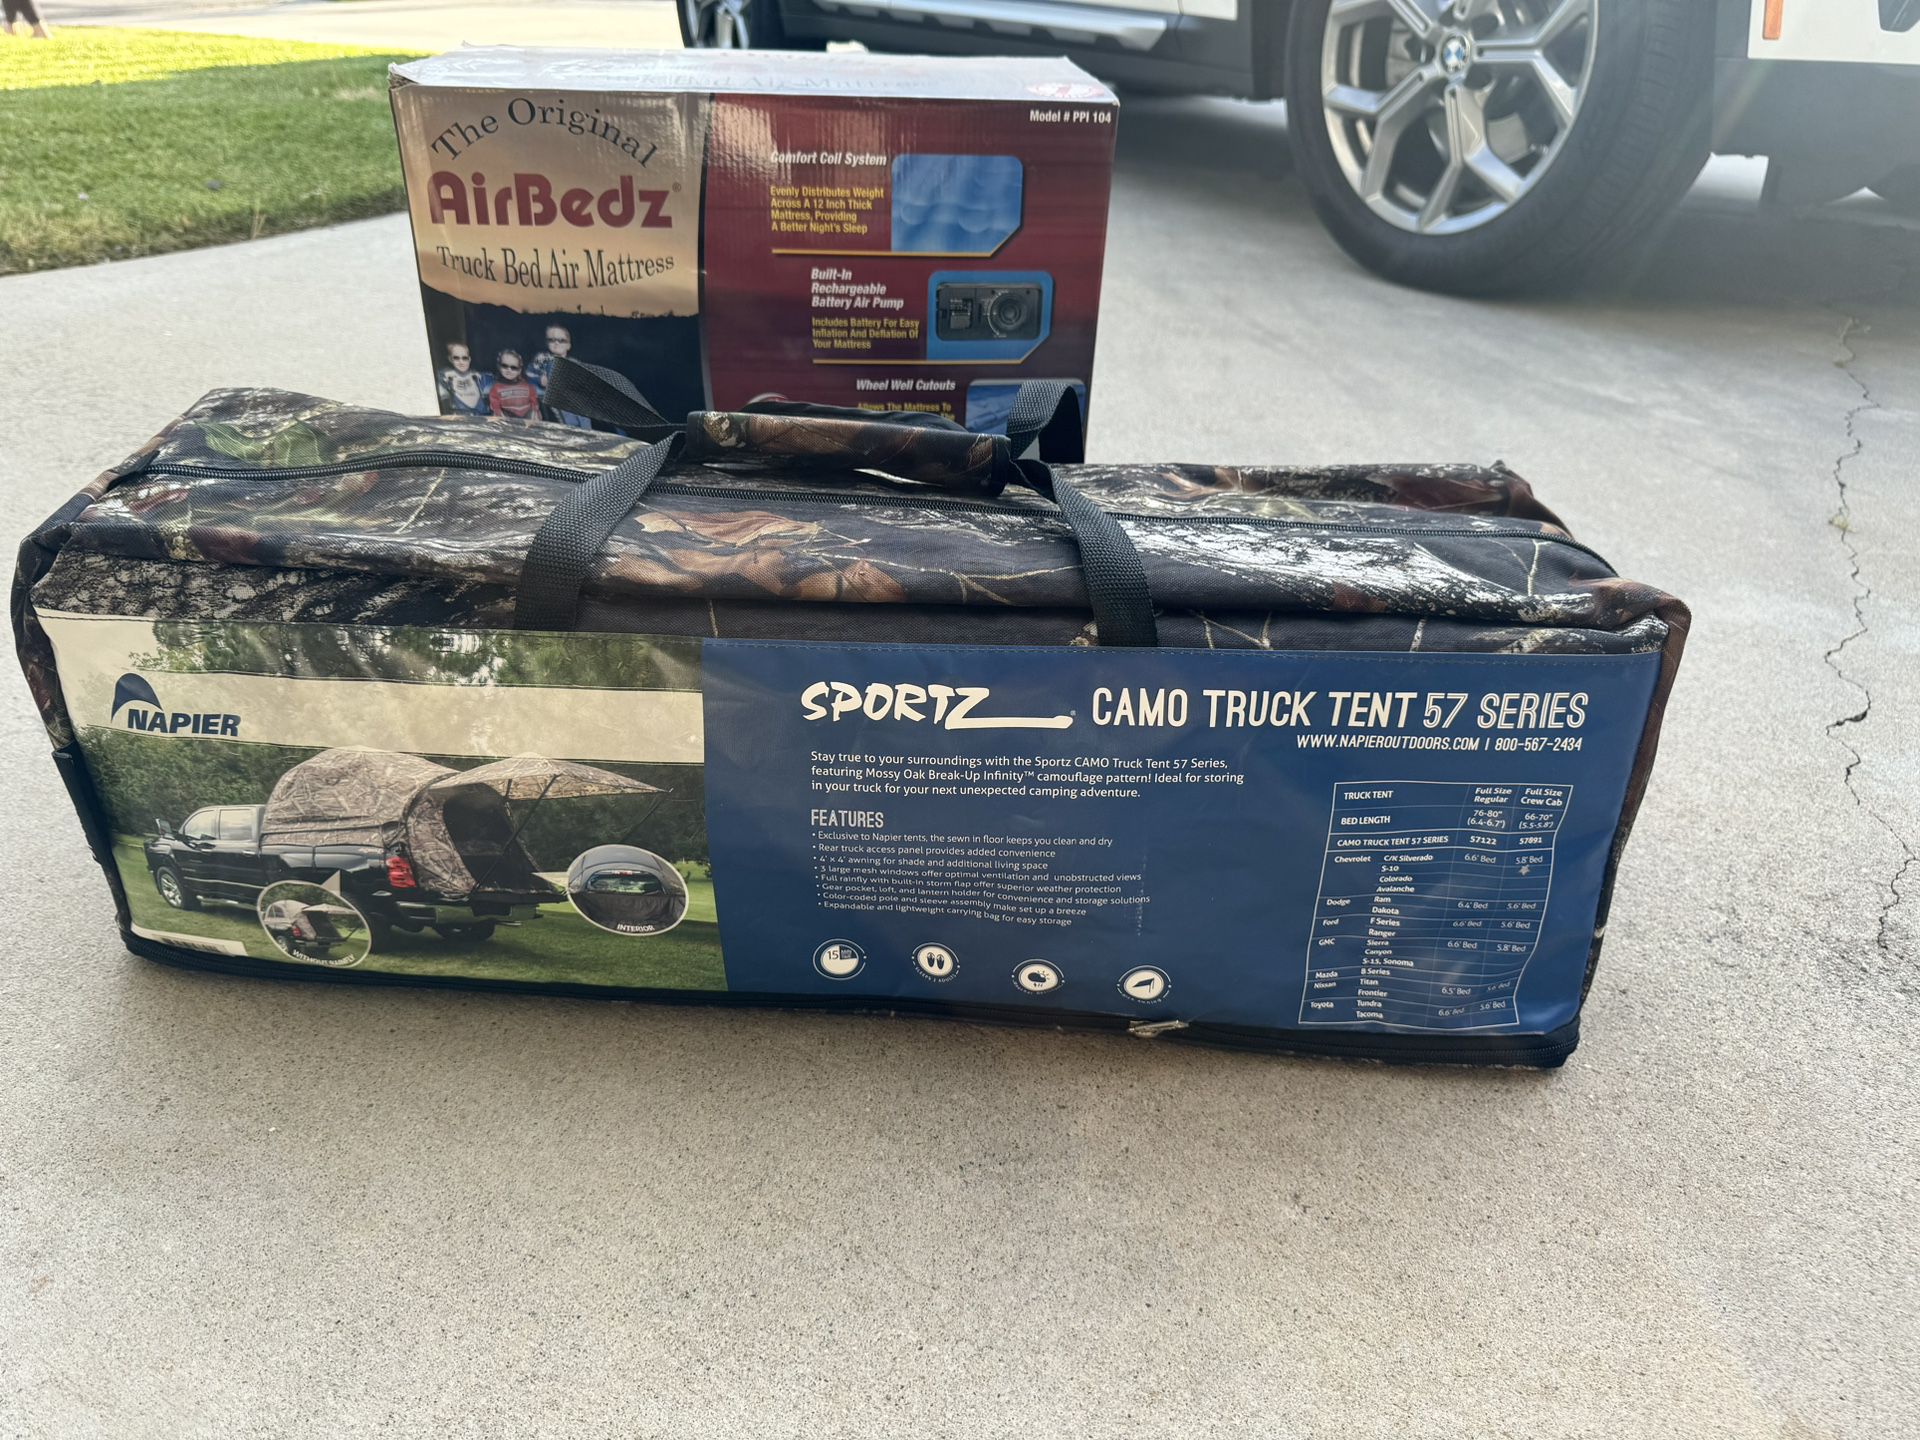 BRAND NEW NEVER OPENED Truck Tent And Truck Bed Air Mattress 